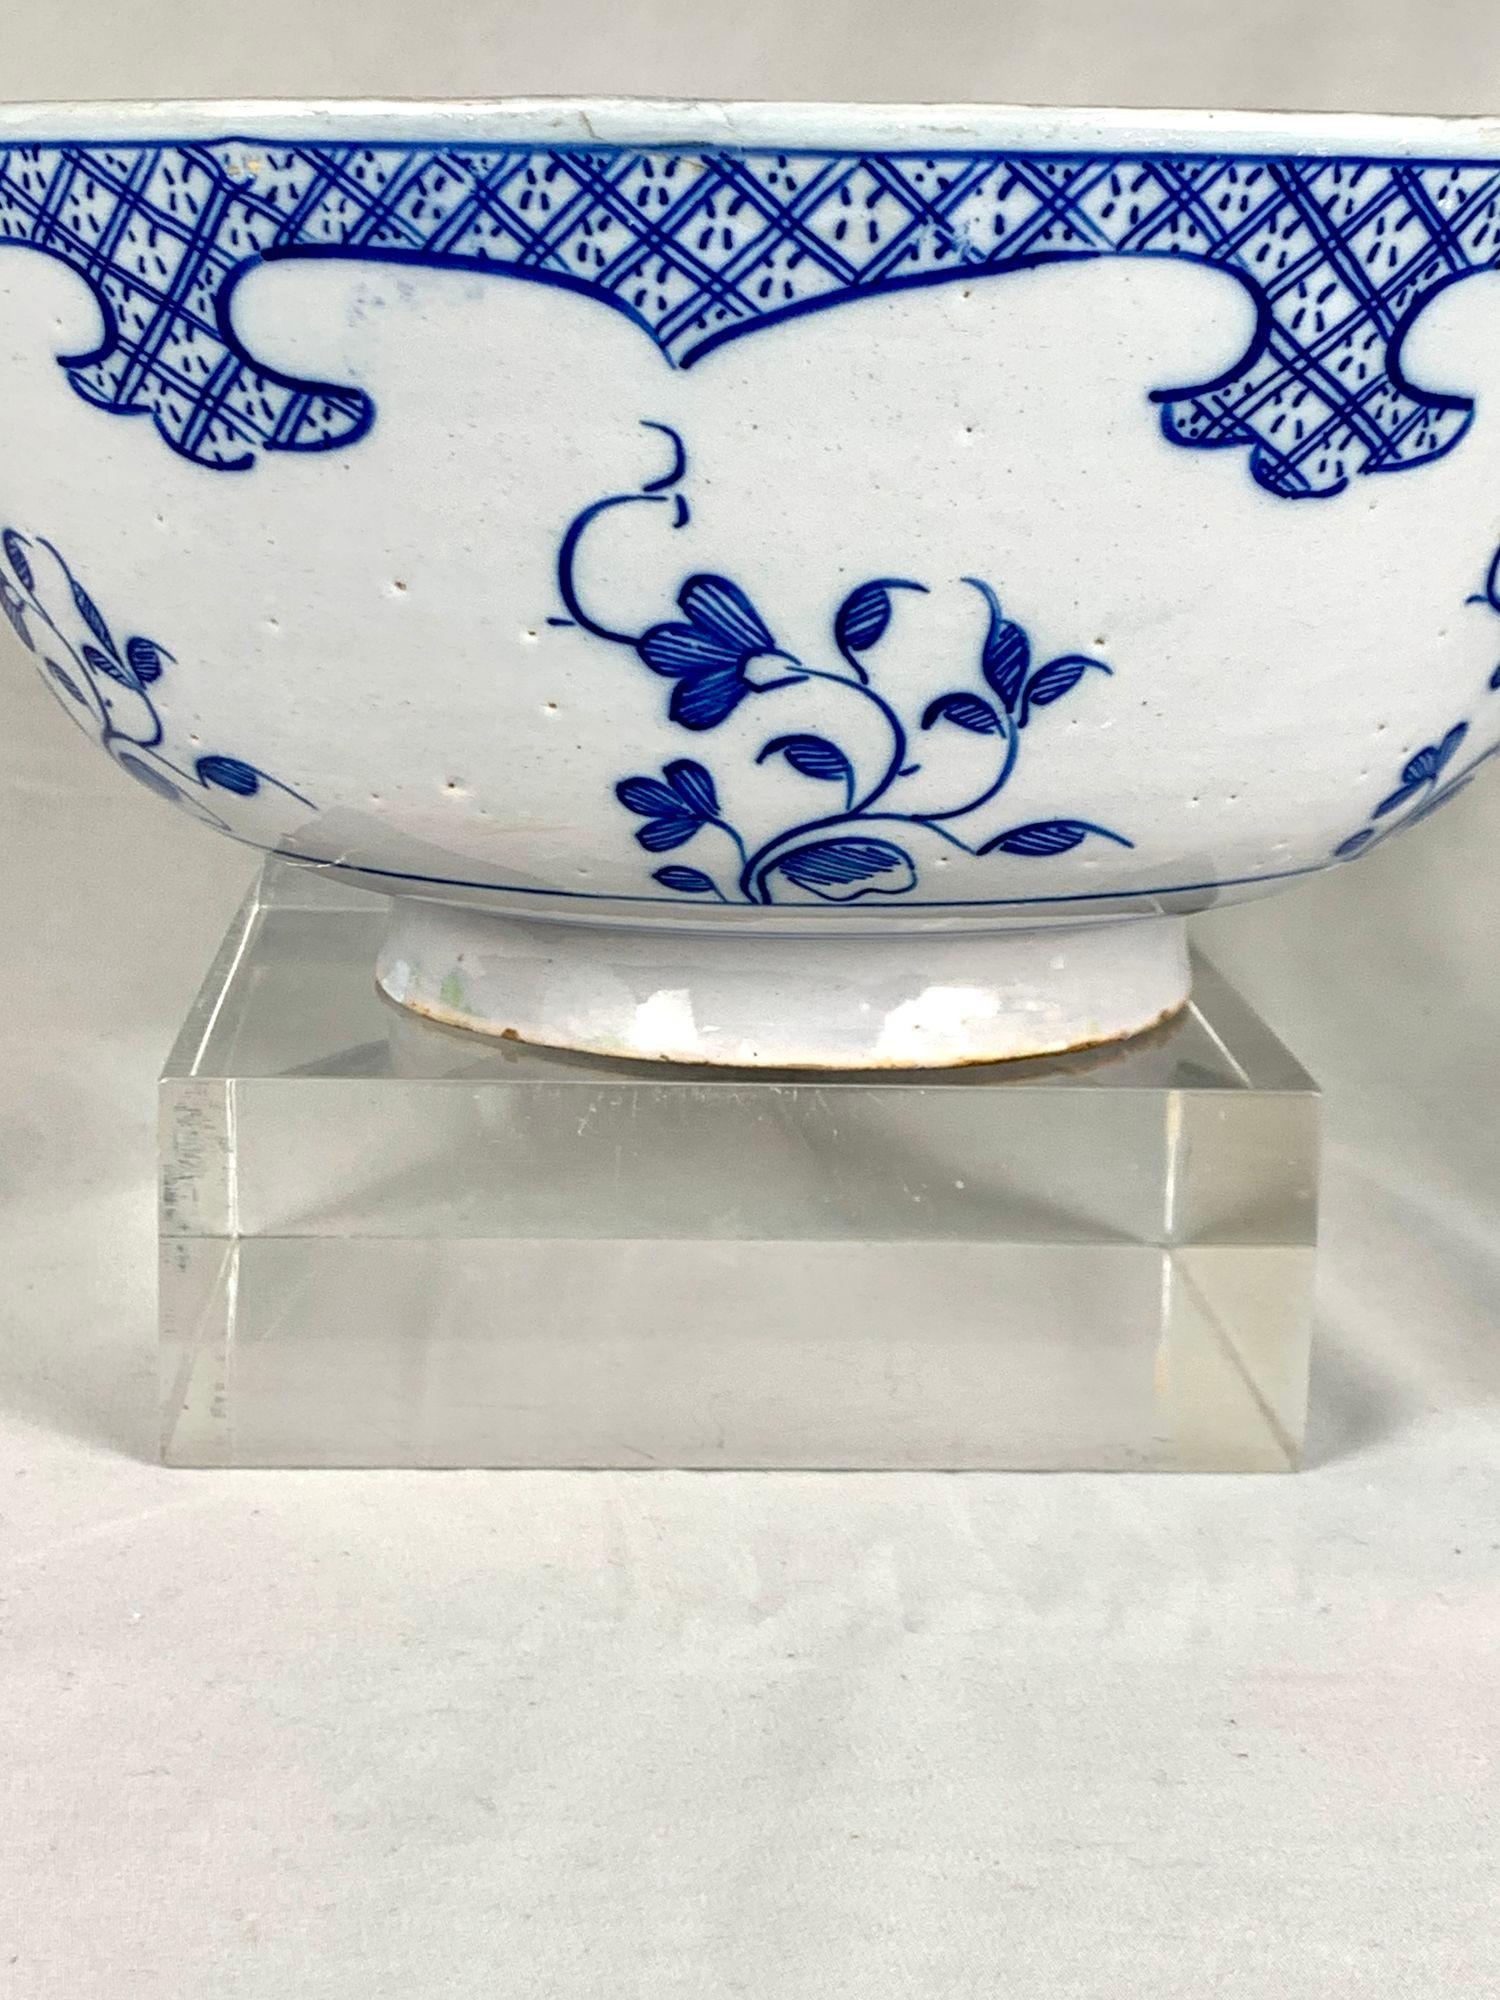 This blue and white Delft bowl from the 18th century, is decorated in a beautiful and elegant manner.
Raised on a traditional short foot, the exterior of the bowl features six hand-painted tulips, each swaying in the wind beneath an eye-catching